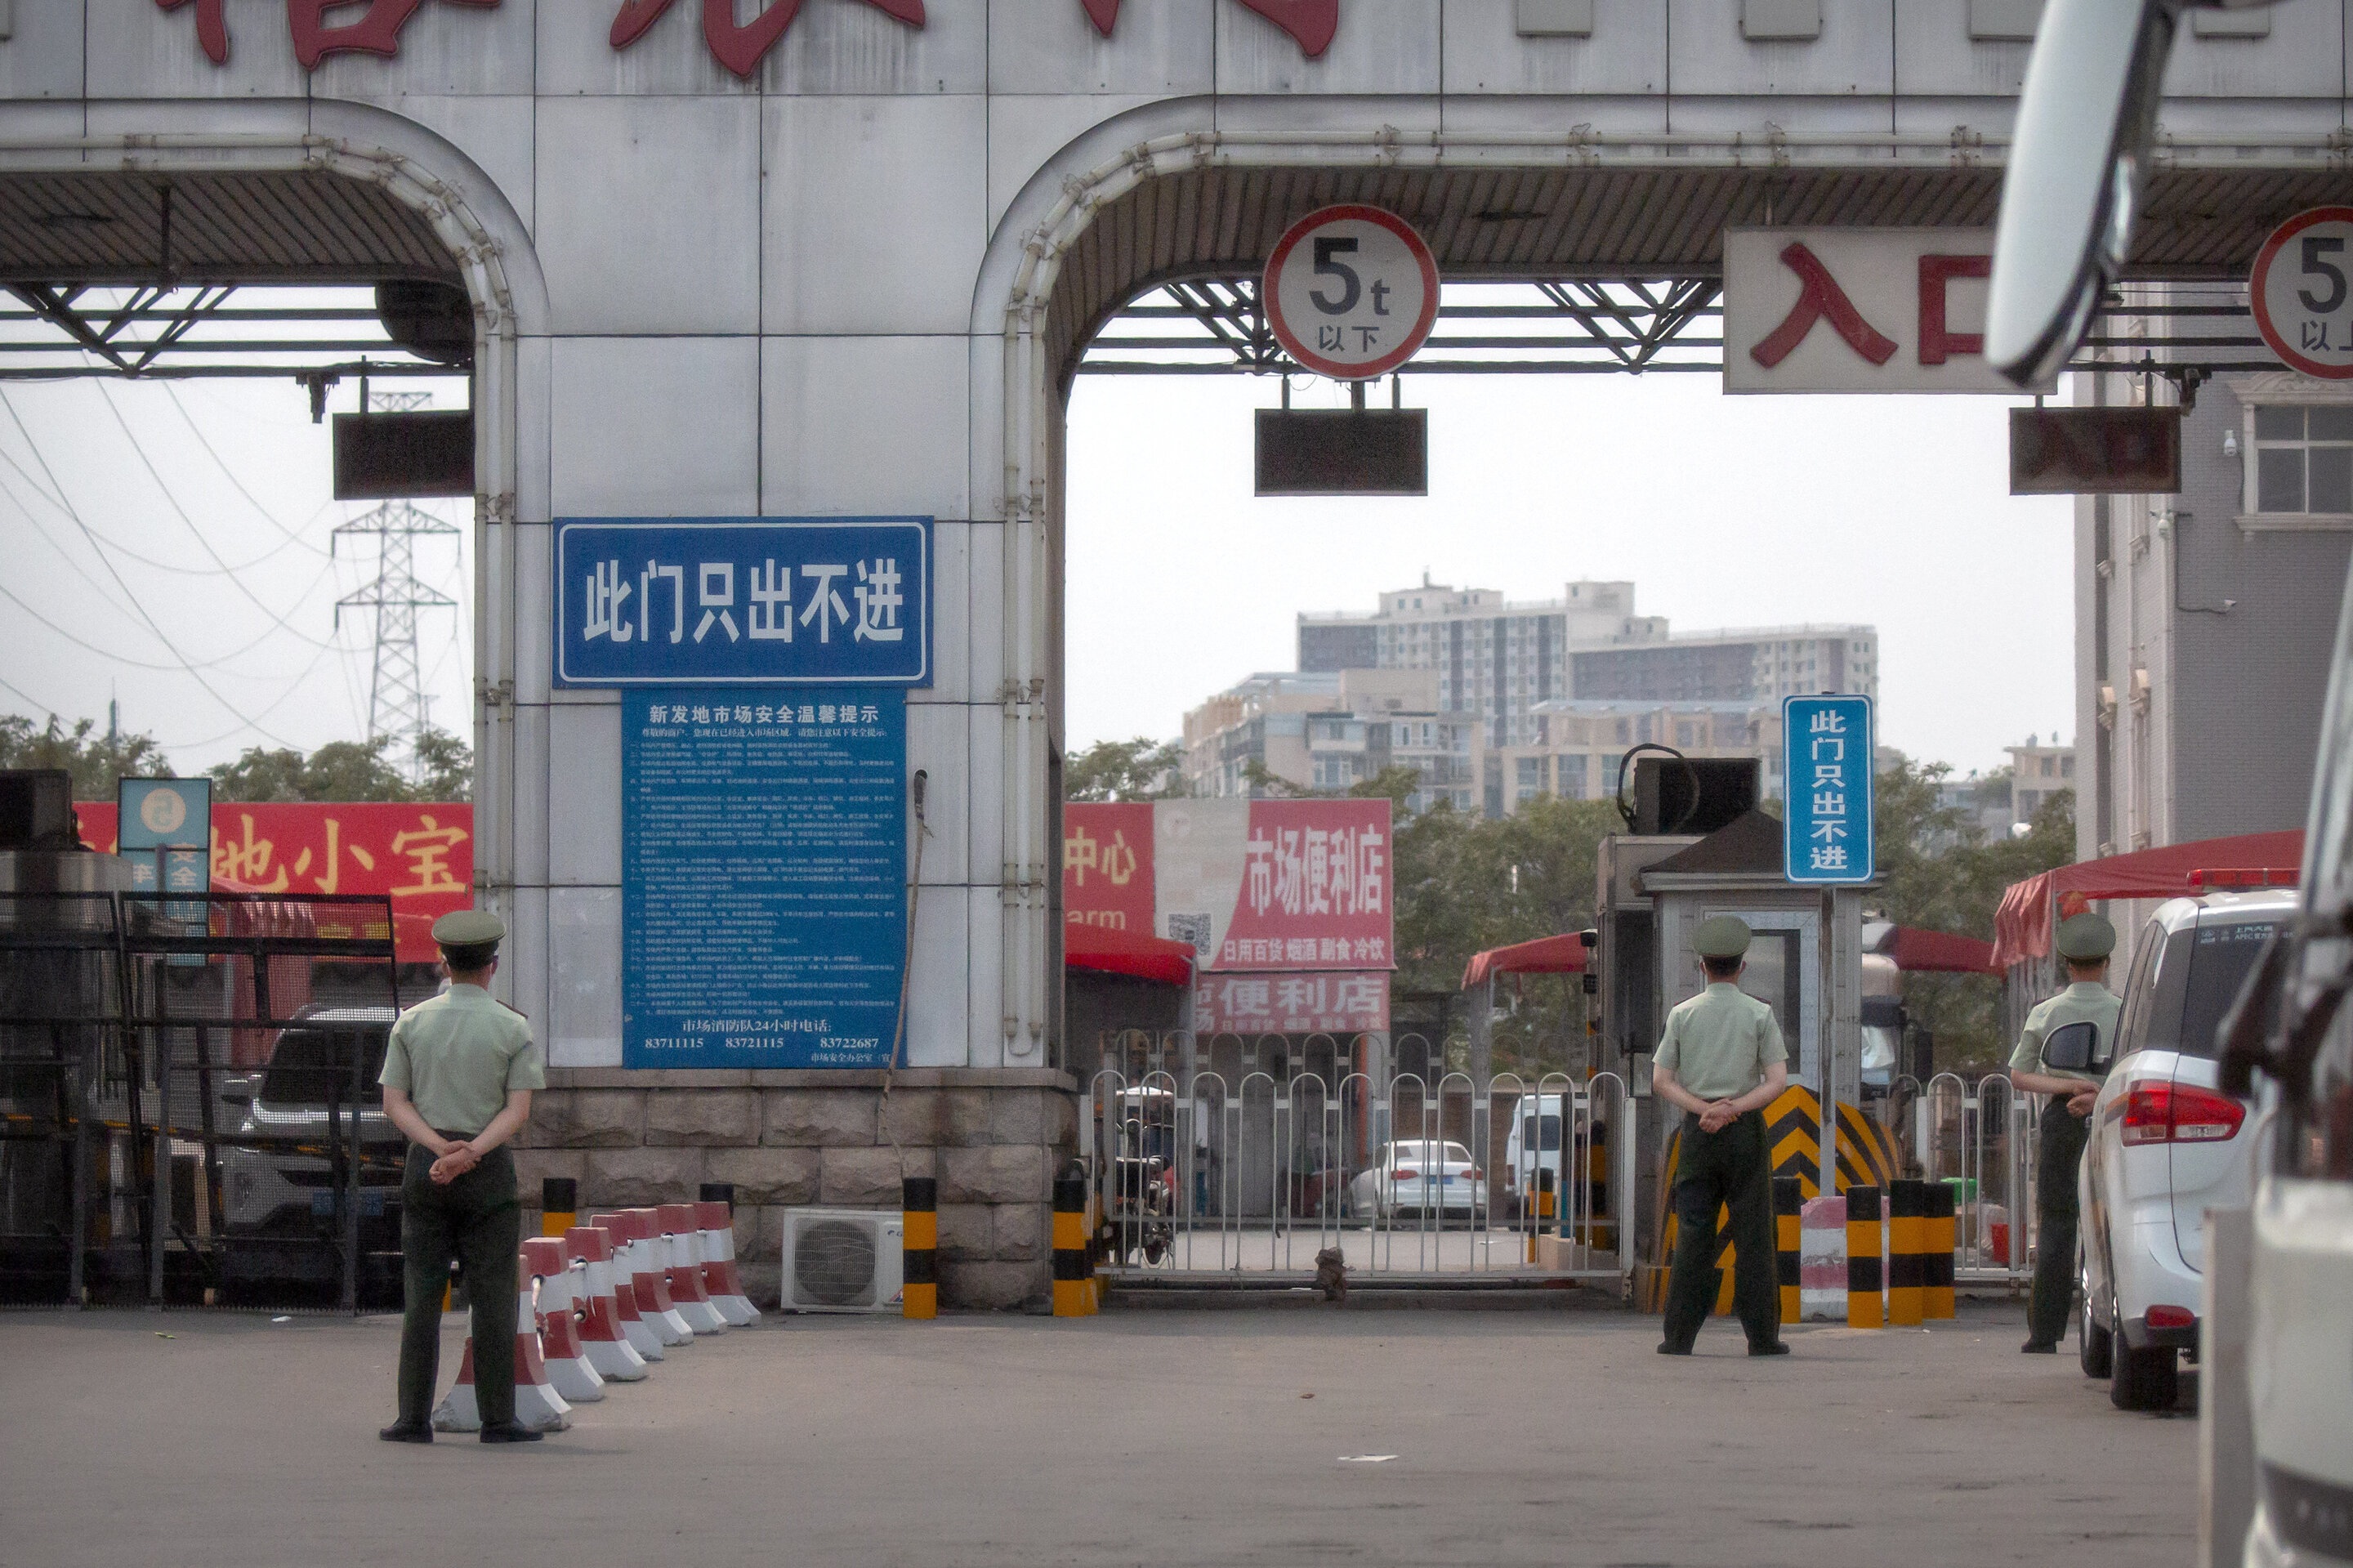 Chinese paramilitary police stand guard at barricaded entrances to the market